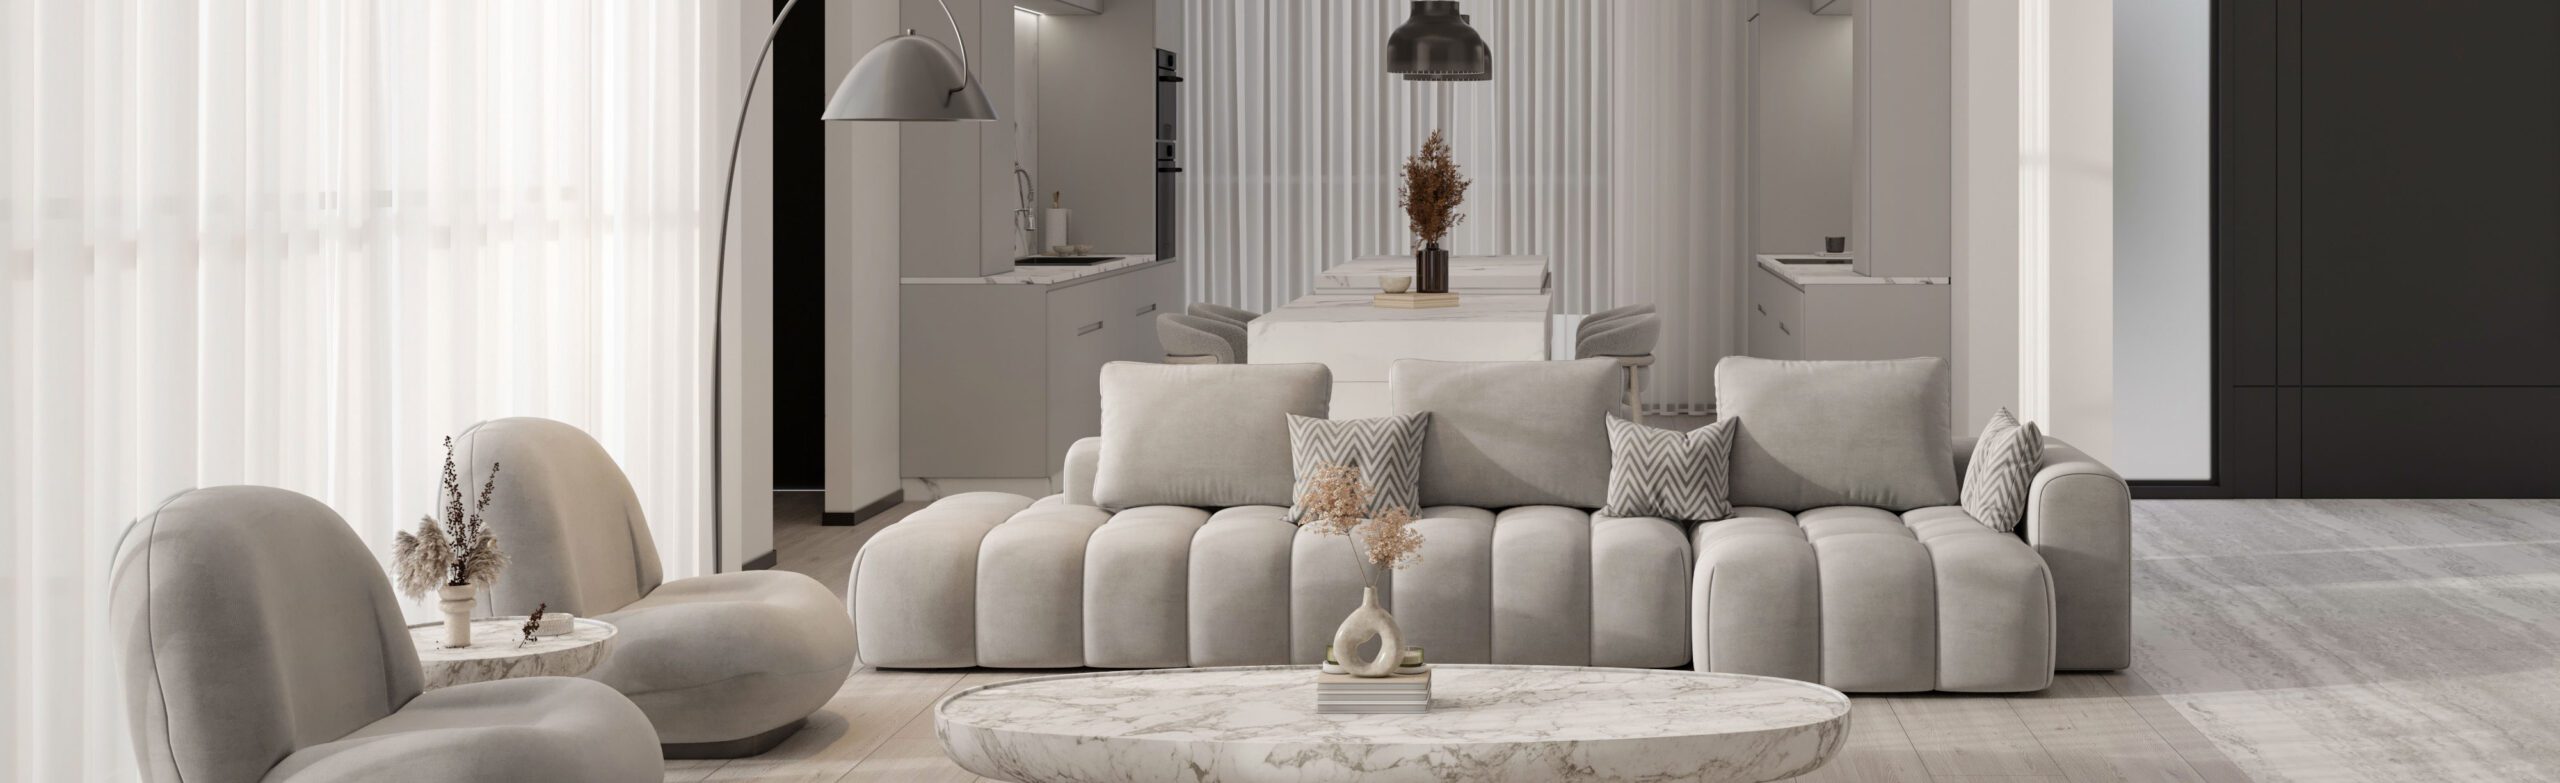 A luxurious and modern living room in Dubai, featuring pristine white furniture, floor-to-ceiling windows with cascading curtains, a white couch and chairs around a grey coffee table, and a sophisticated color palette of black, white, and subtle grey tones. This interior design masterpiece demonstrates the expertise of Dubai Interior Designers in creating spacious and elegant living spaces."